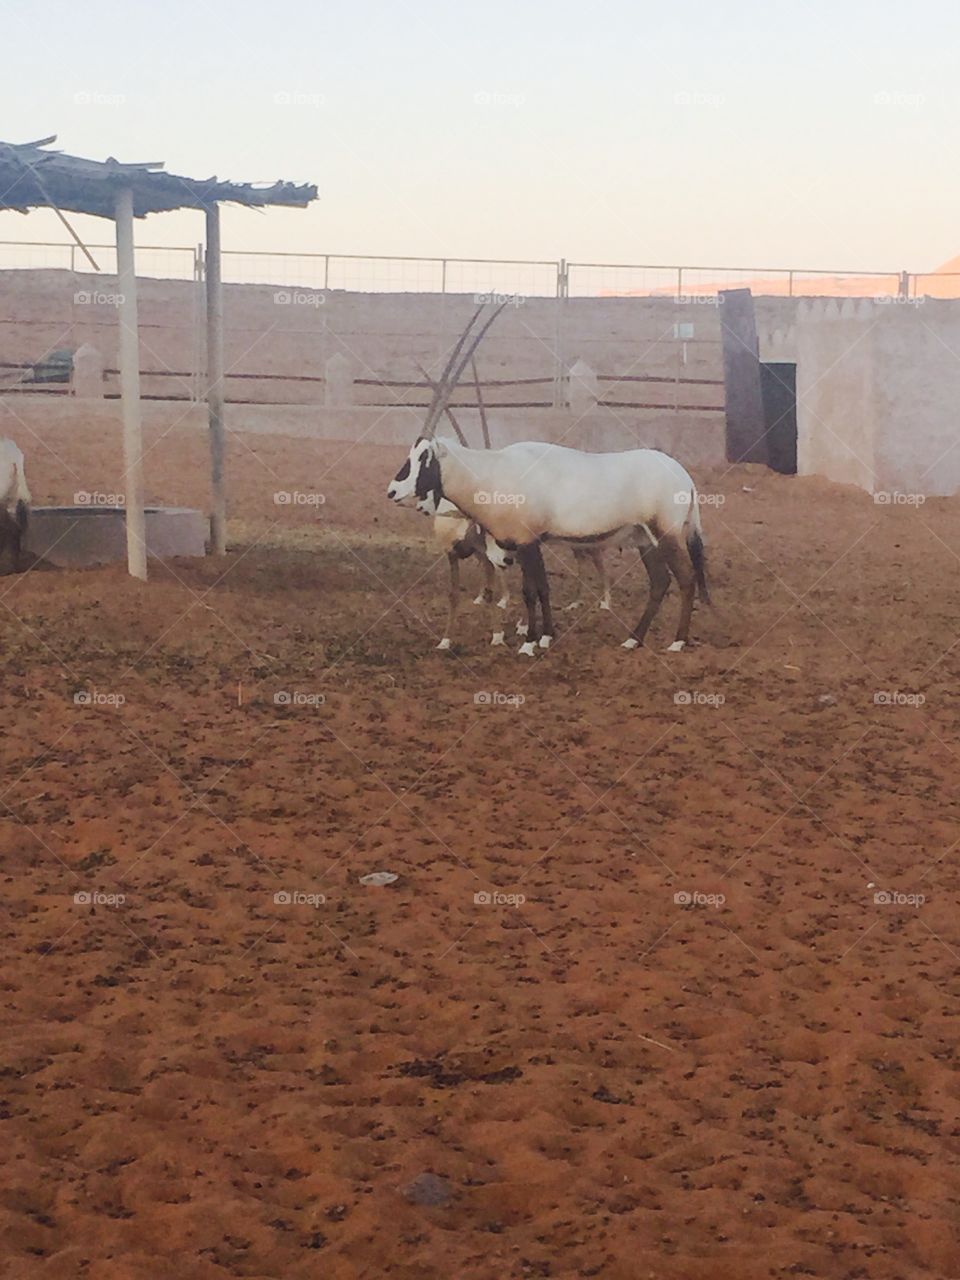 Arabian Oryx, classified as endangered on the IUCN Red List